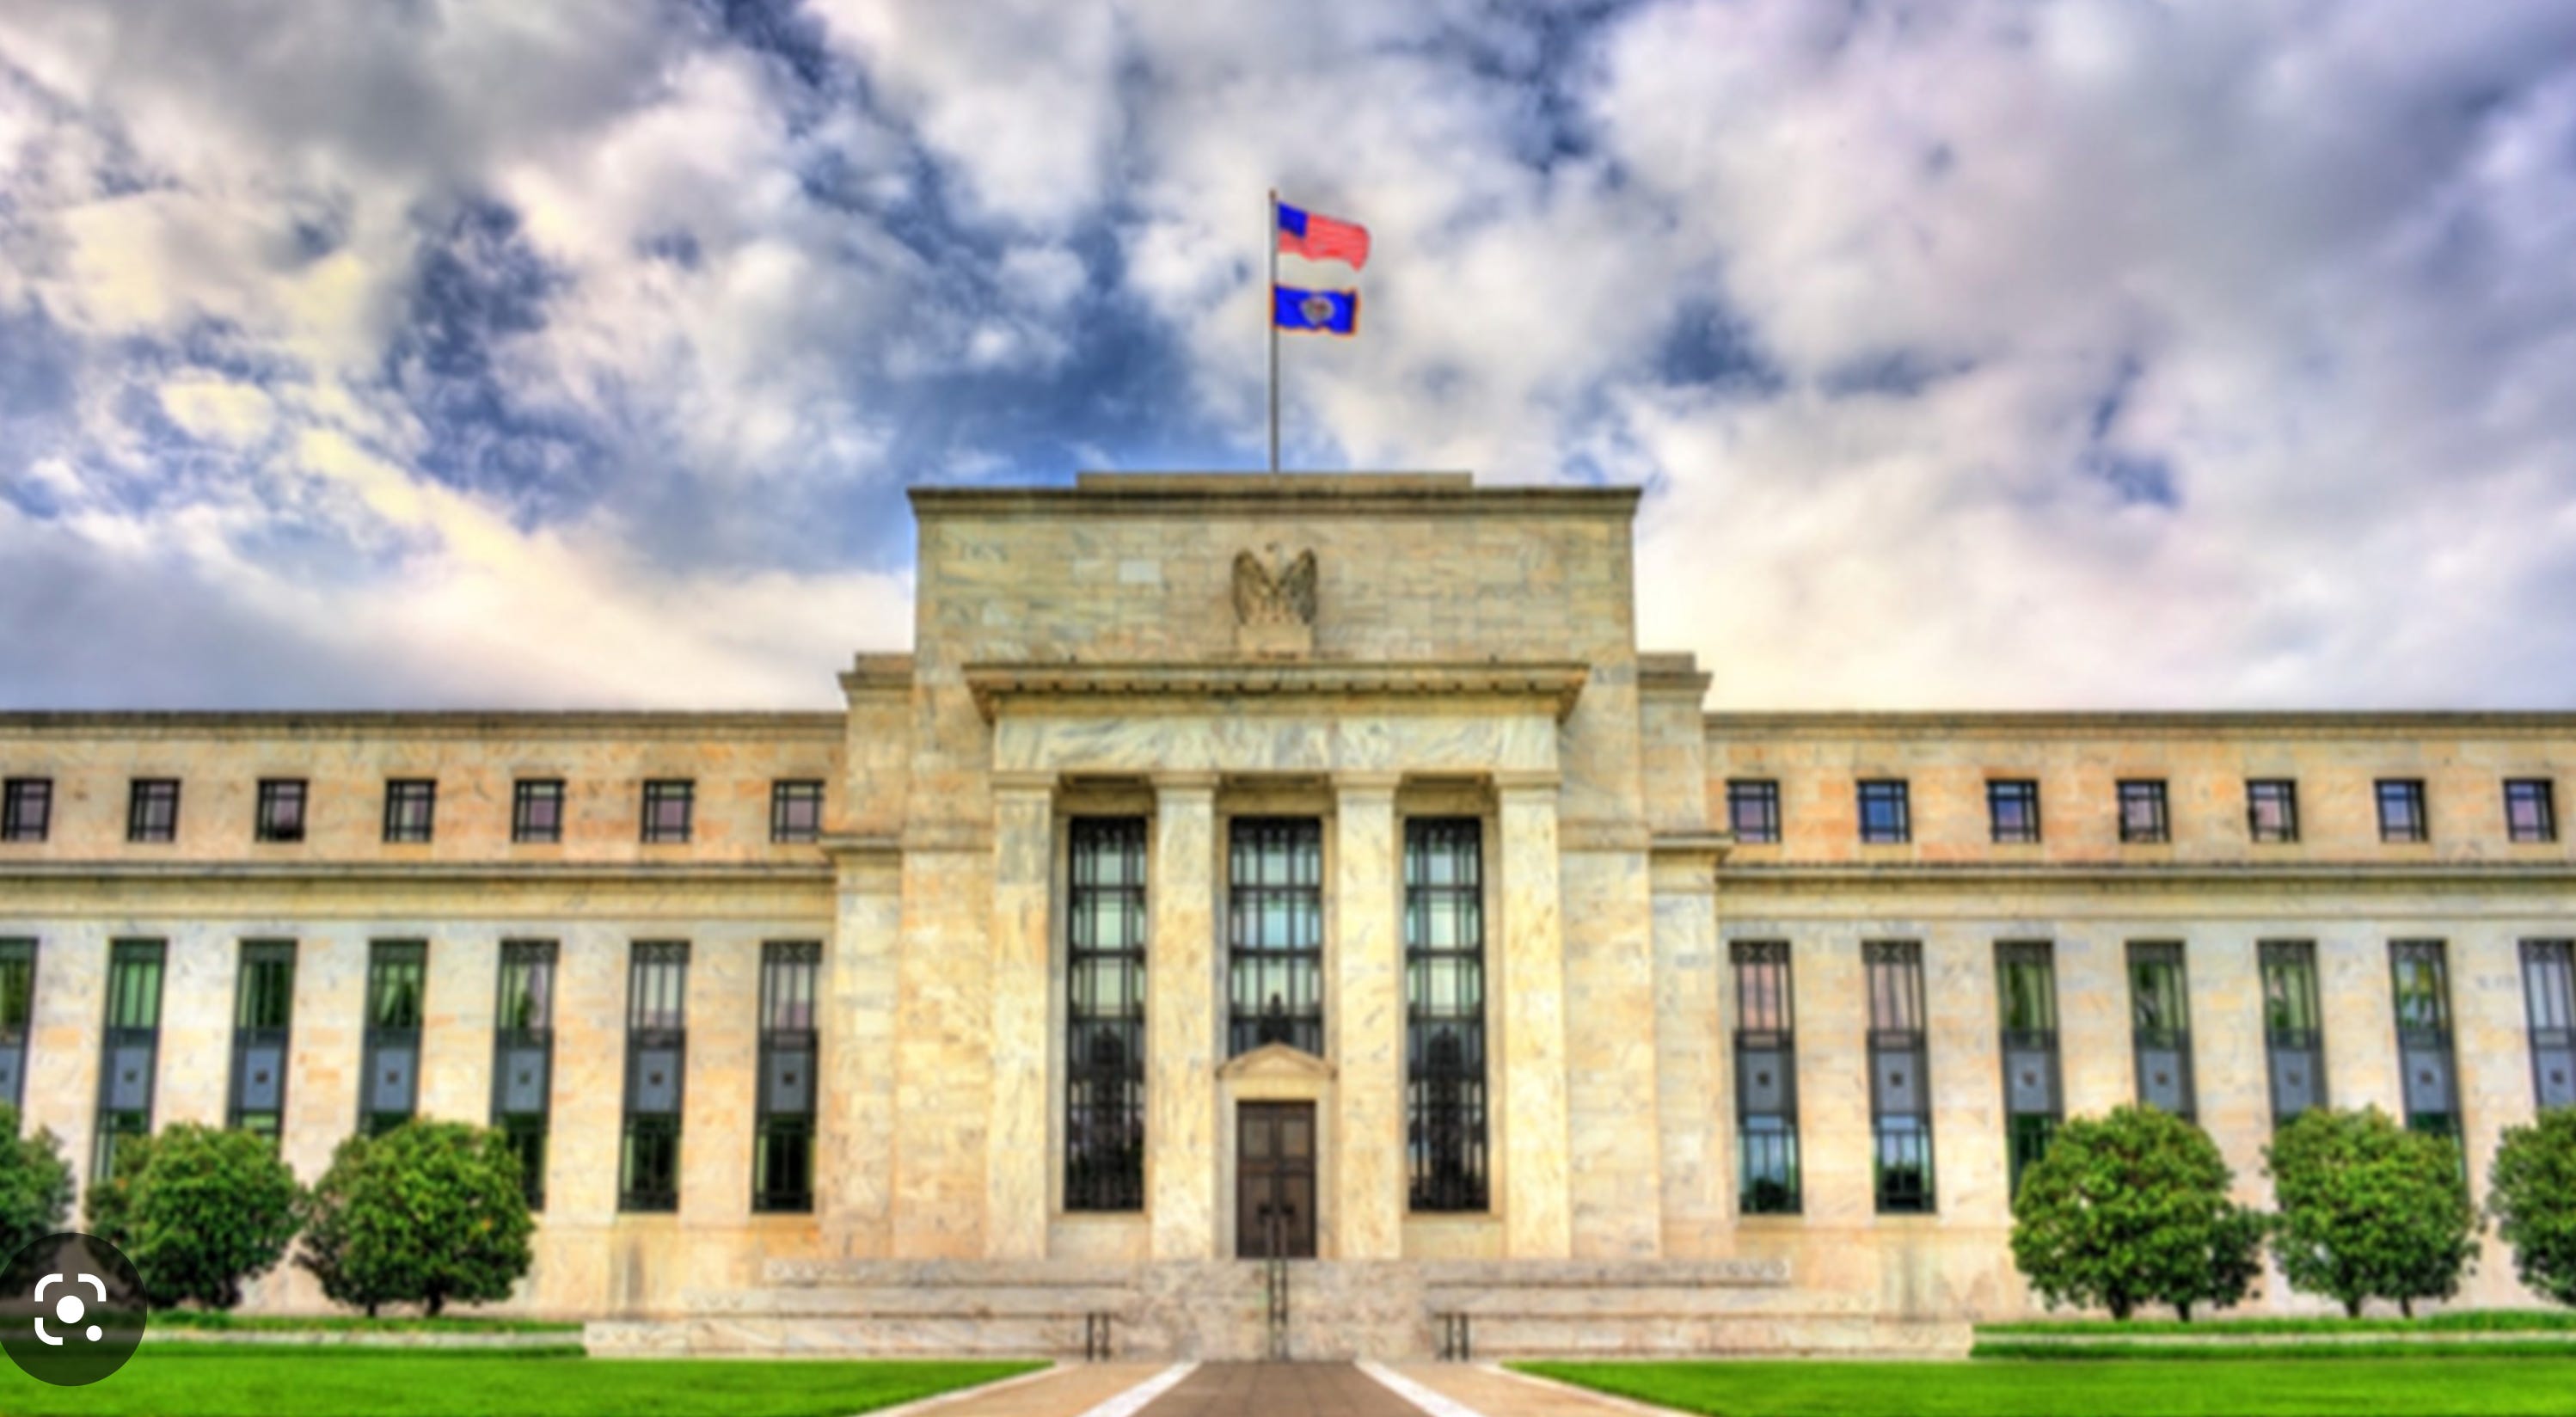 Do We Have a Contract With the Federal Reserve? – American Hypnotist